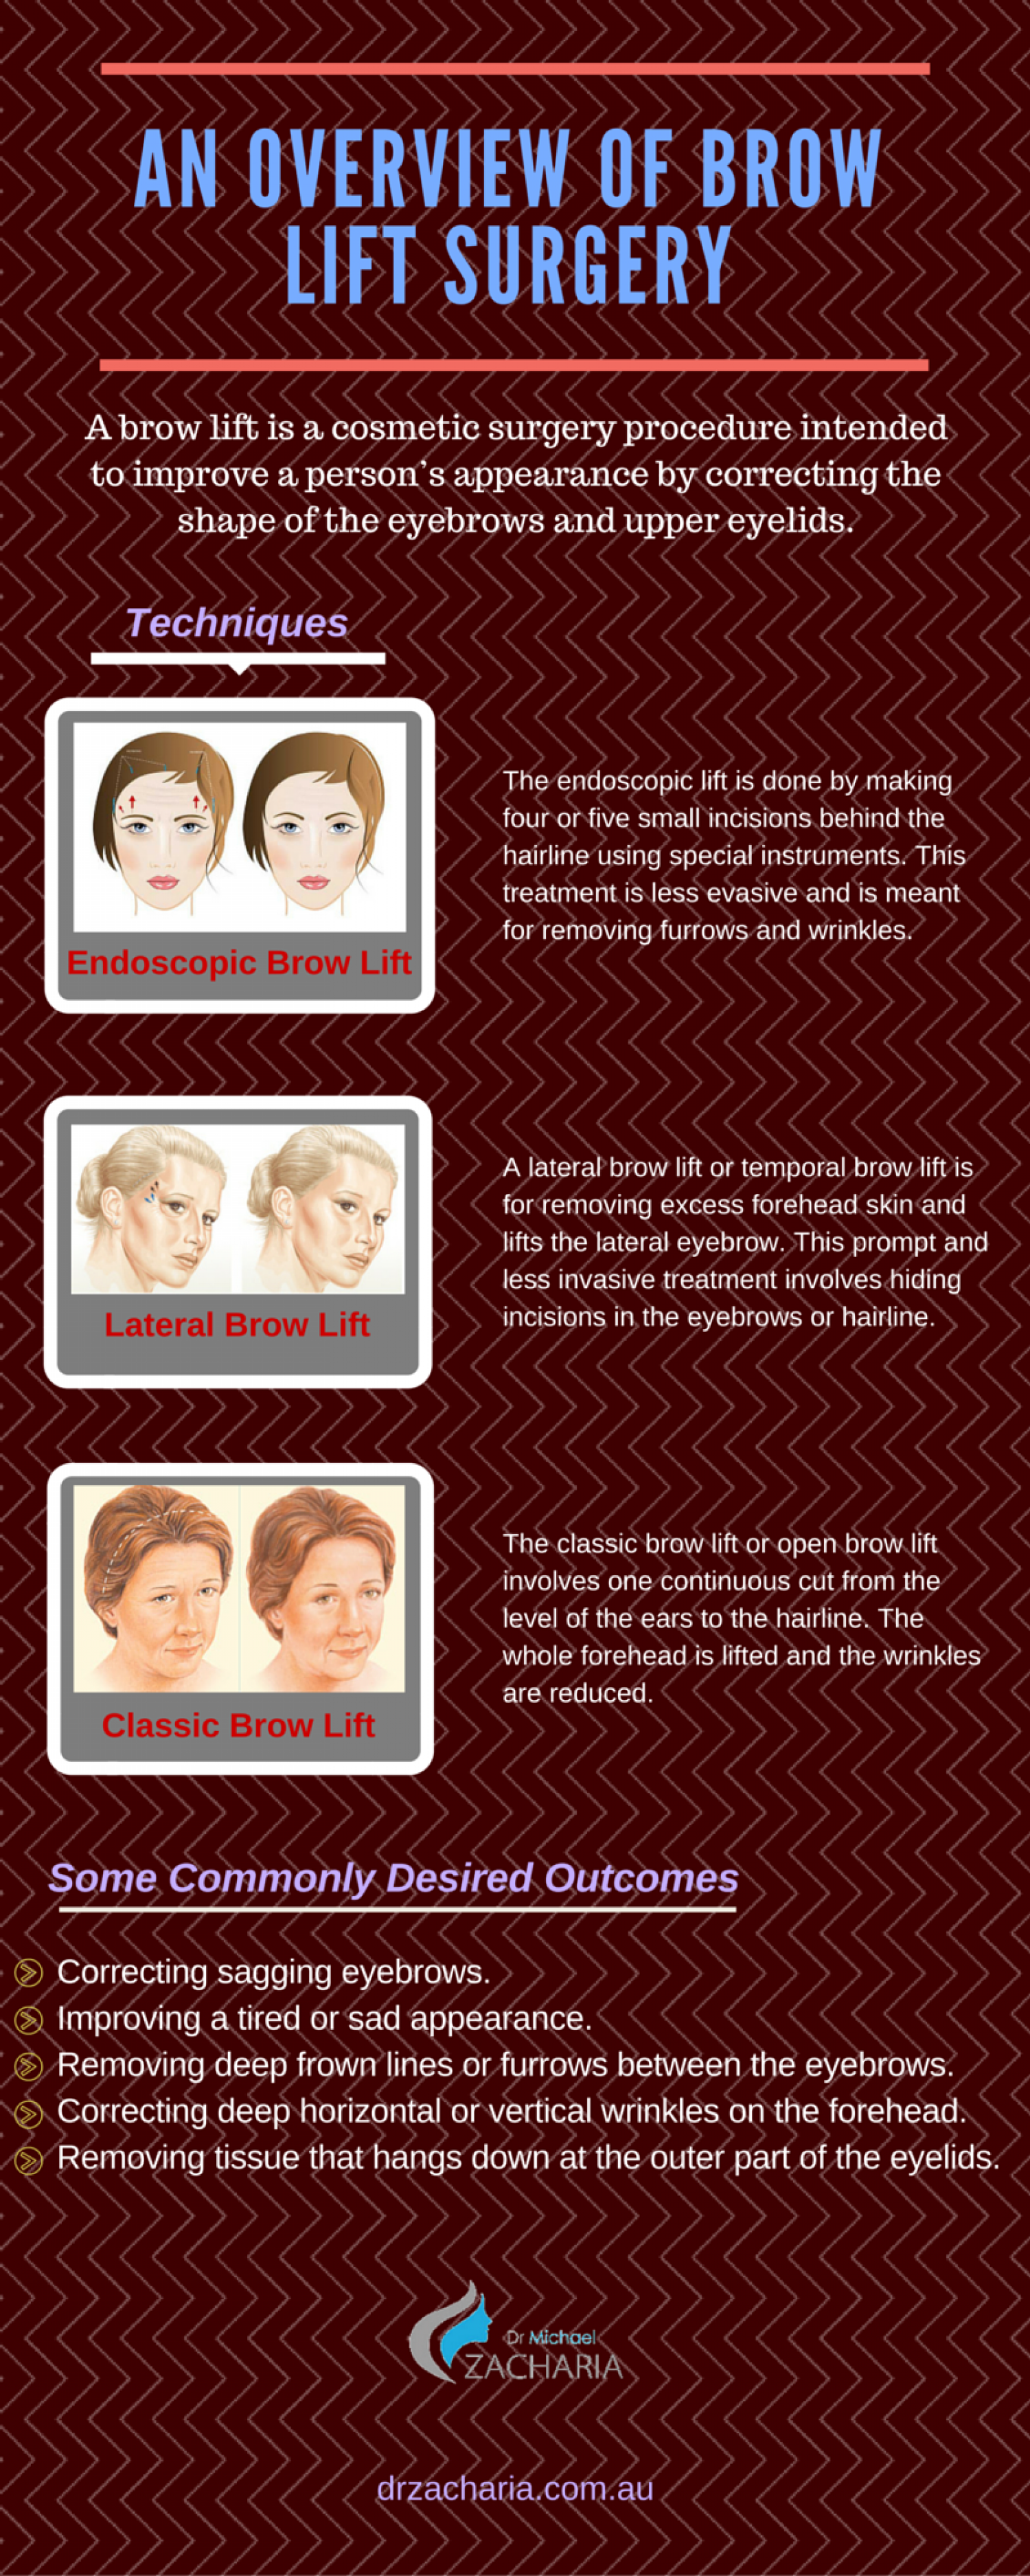 An Overview Of Brow Lift Surgery